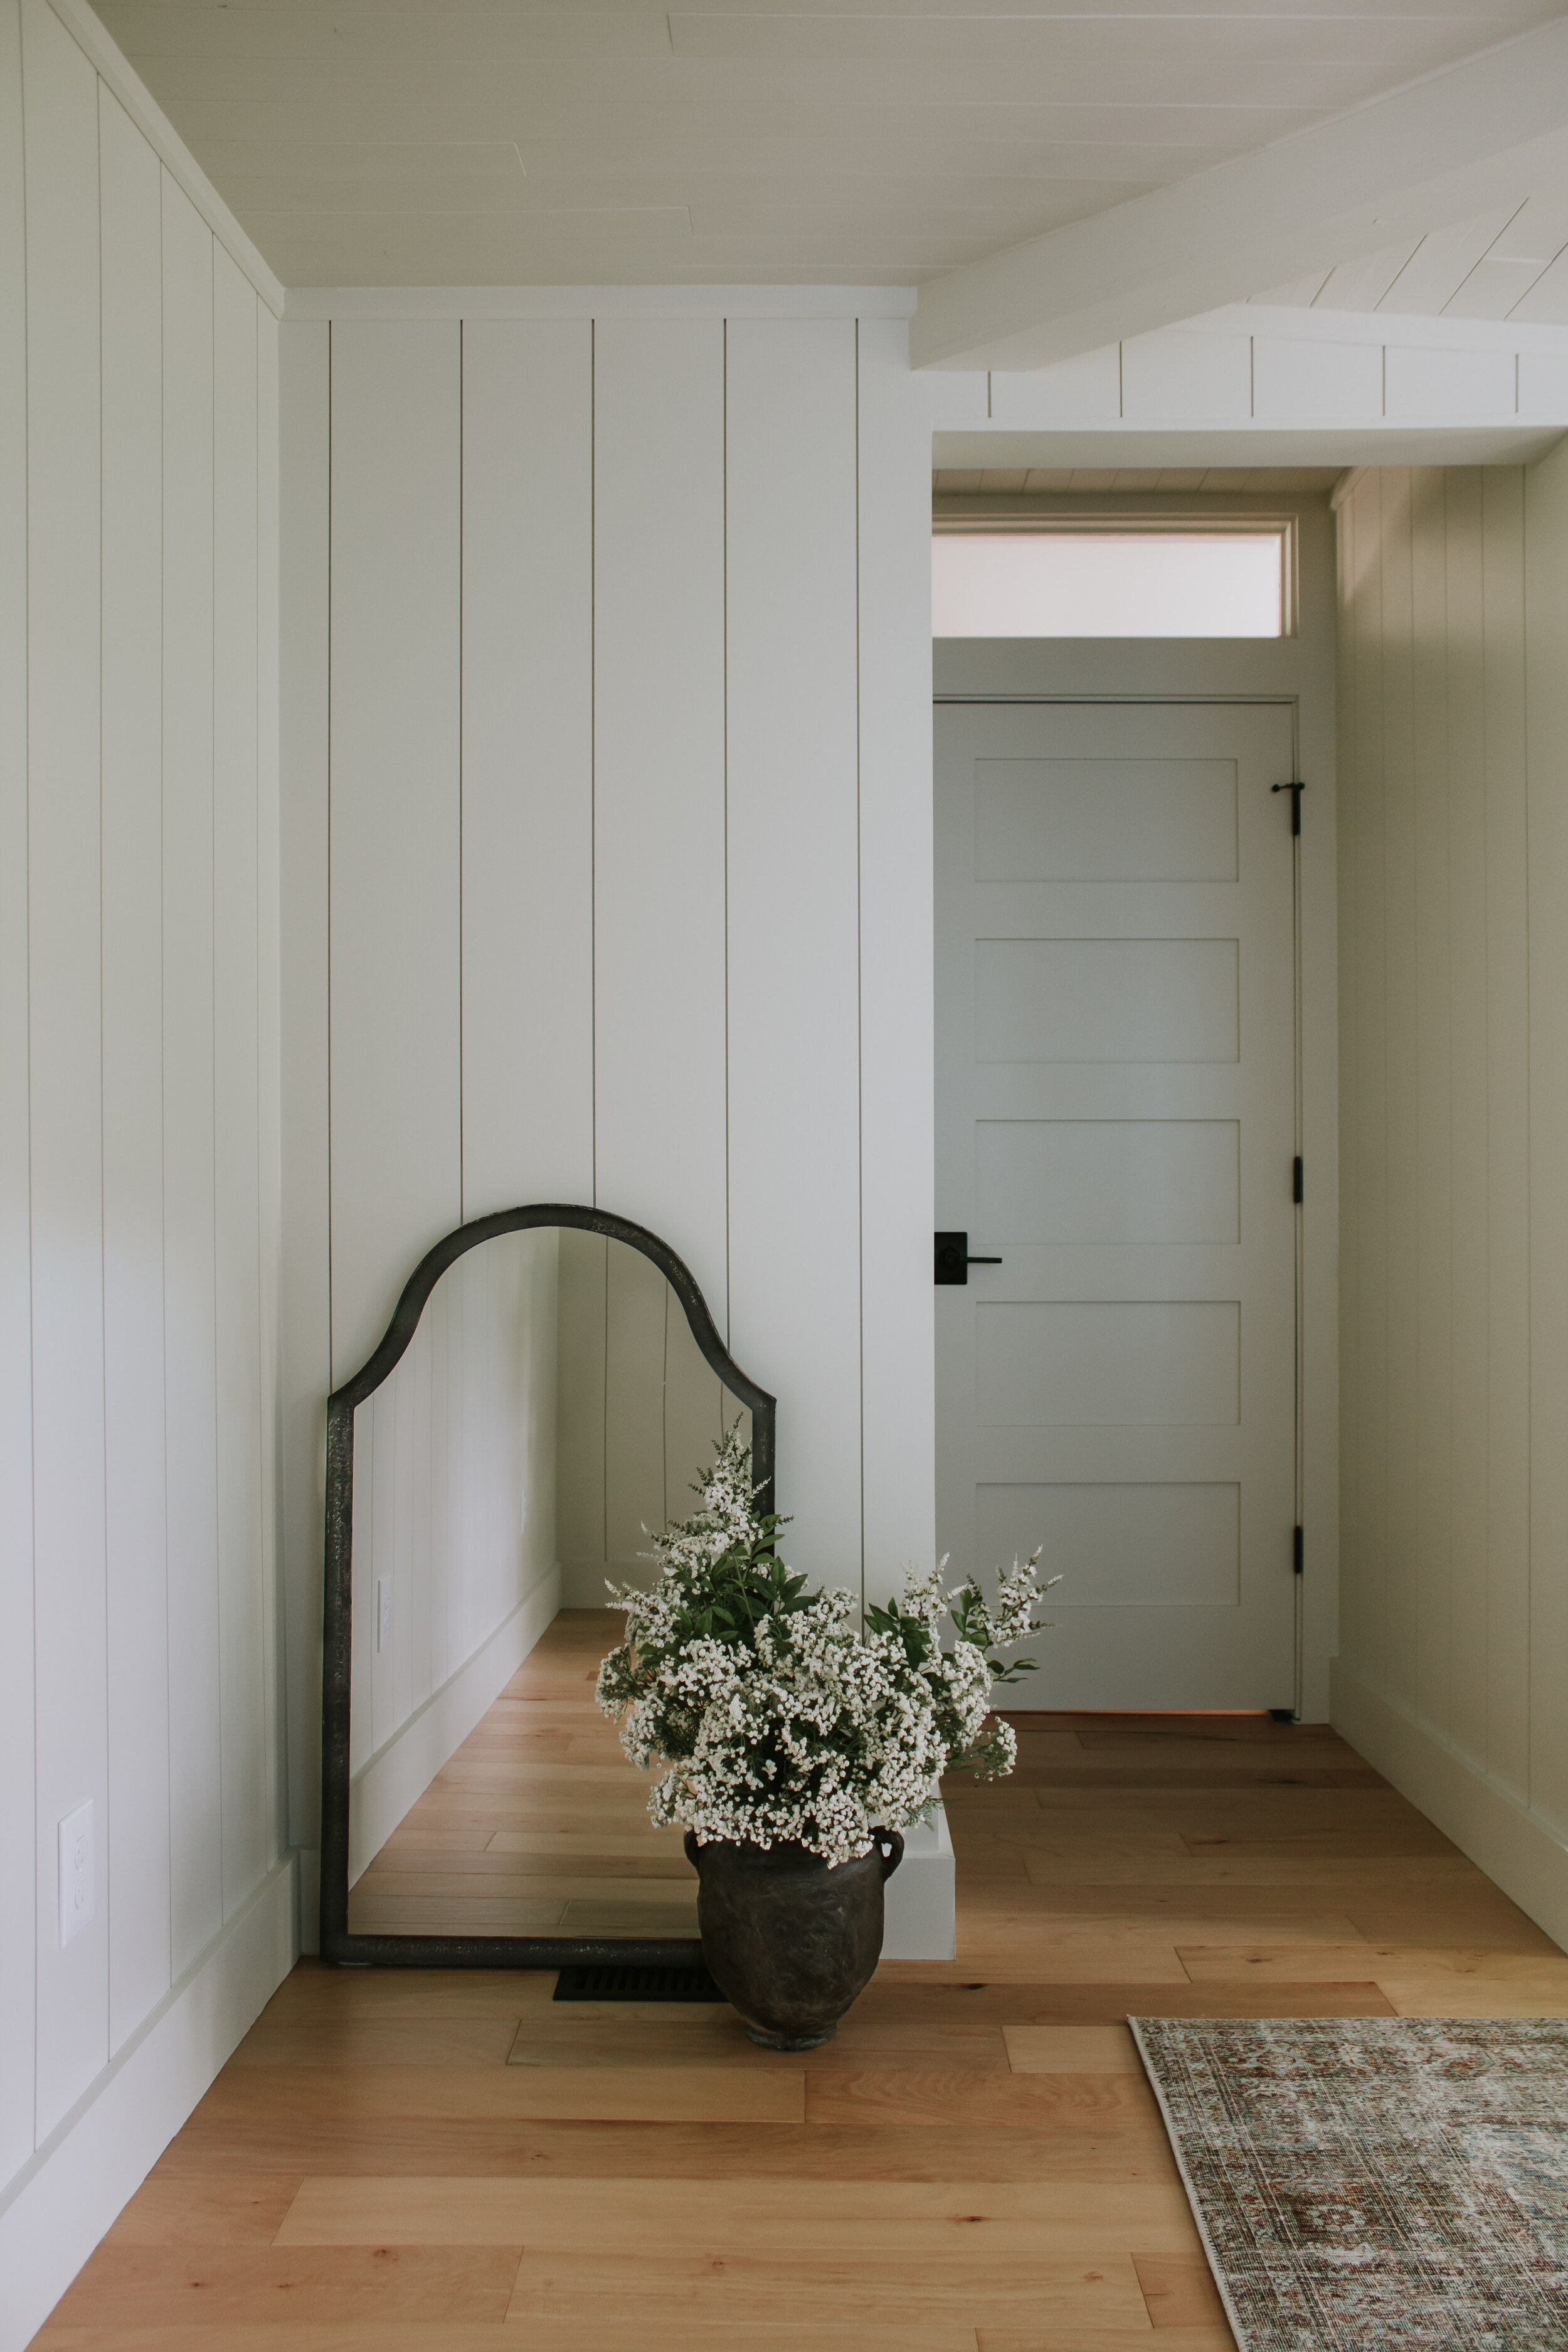 A peek at the paint color we chose for our primary bedroom makeover. A putty warm white neutral for the walls. Vertical Shiplap, nickel gap planks on the walls and wood slatted ceilings create a modernized cabin bedroom retreat. | Nadine Stay